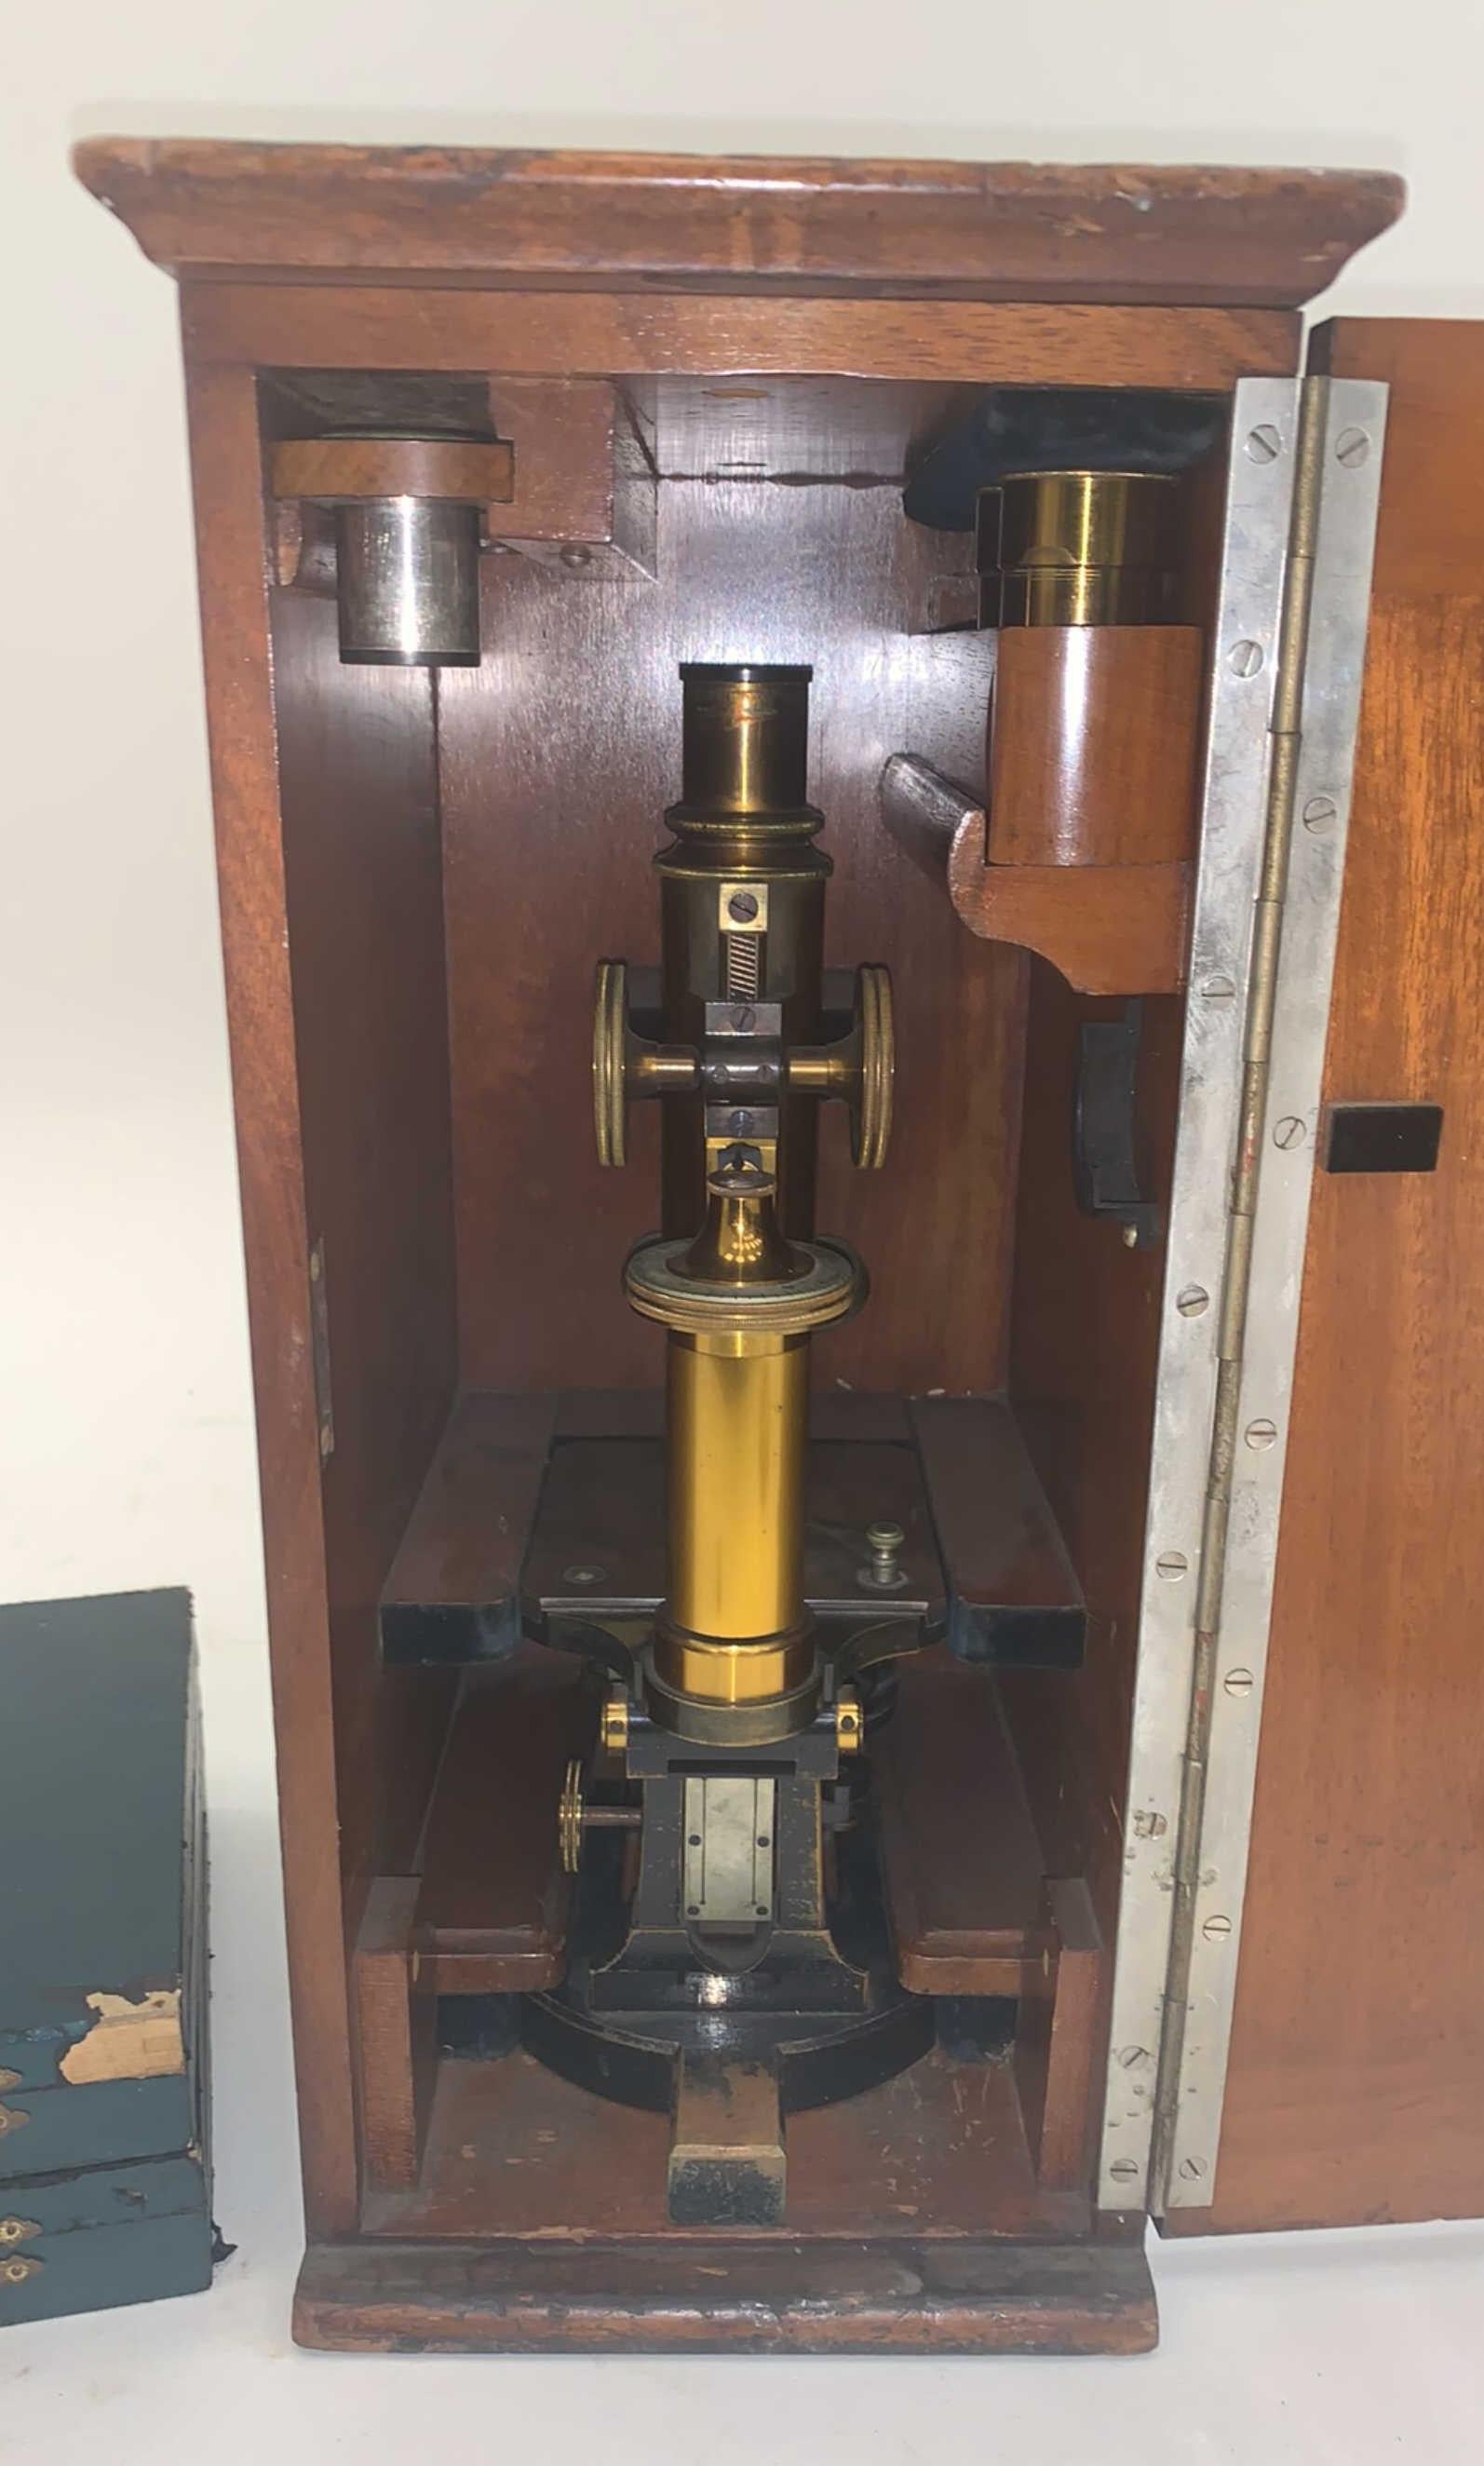 This incredible microscope dates from the late 19th century, during which Carl Zeiss and Edward Abbe were the foremost innovators of revolutionary microscope lens technology. It is a Stand IV continental-style microscope, featuring a polished brass